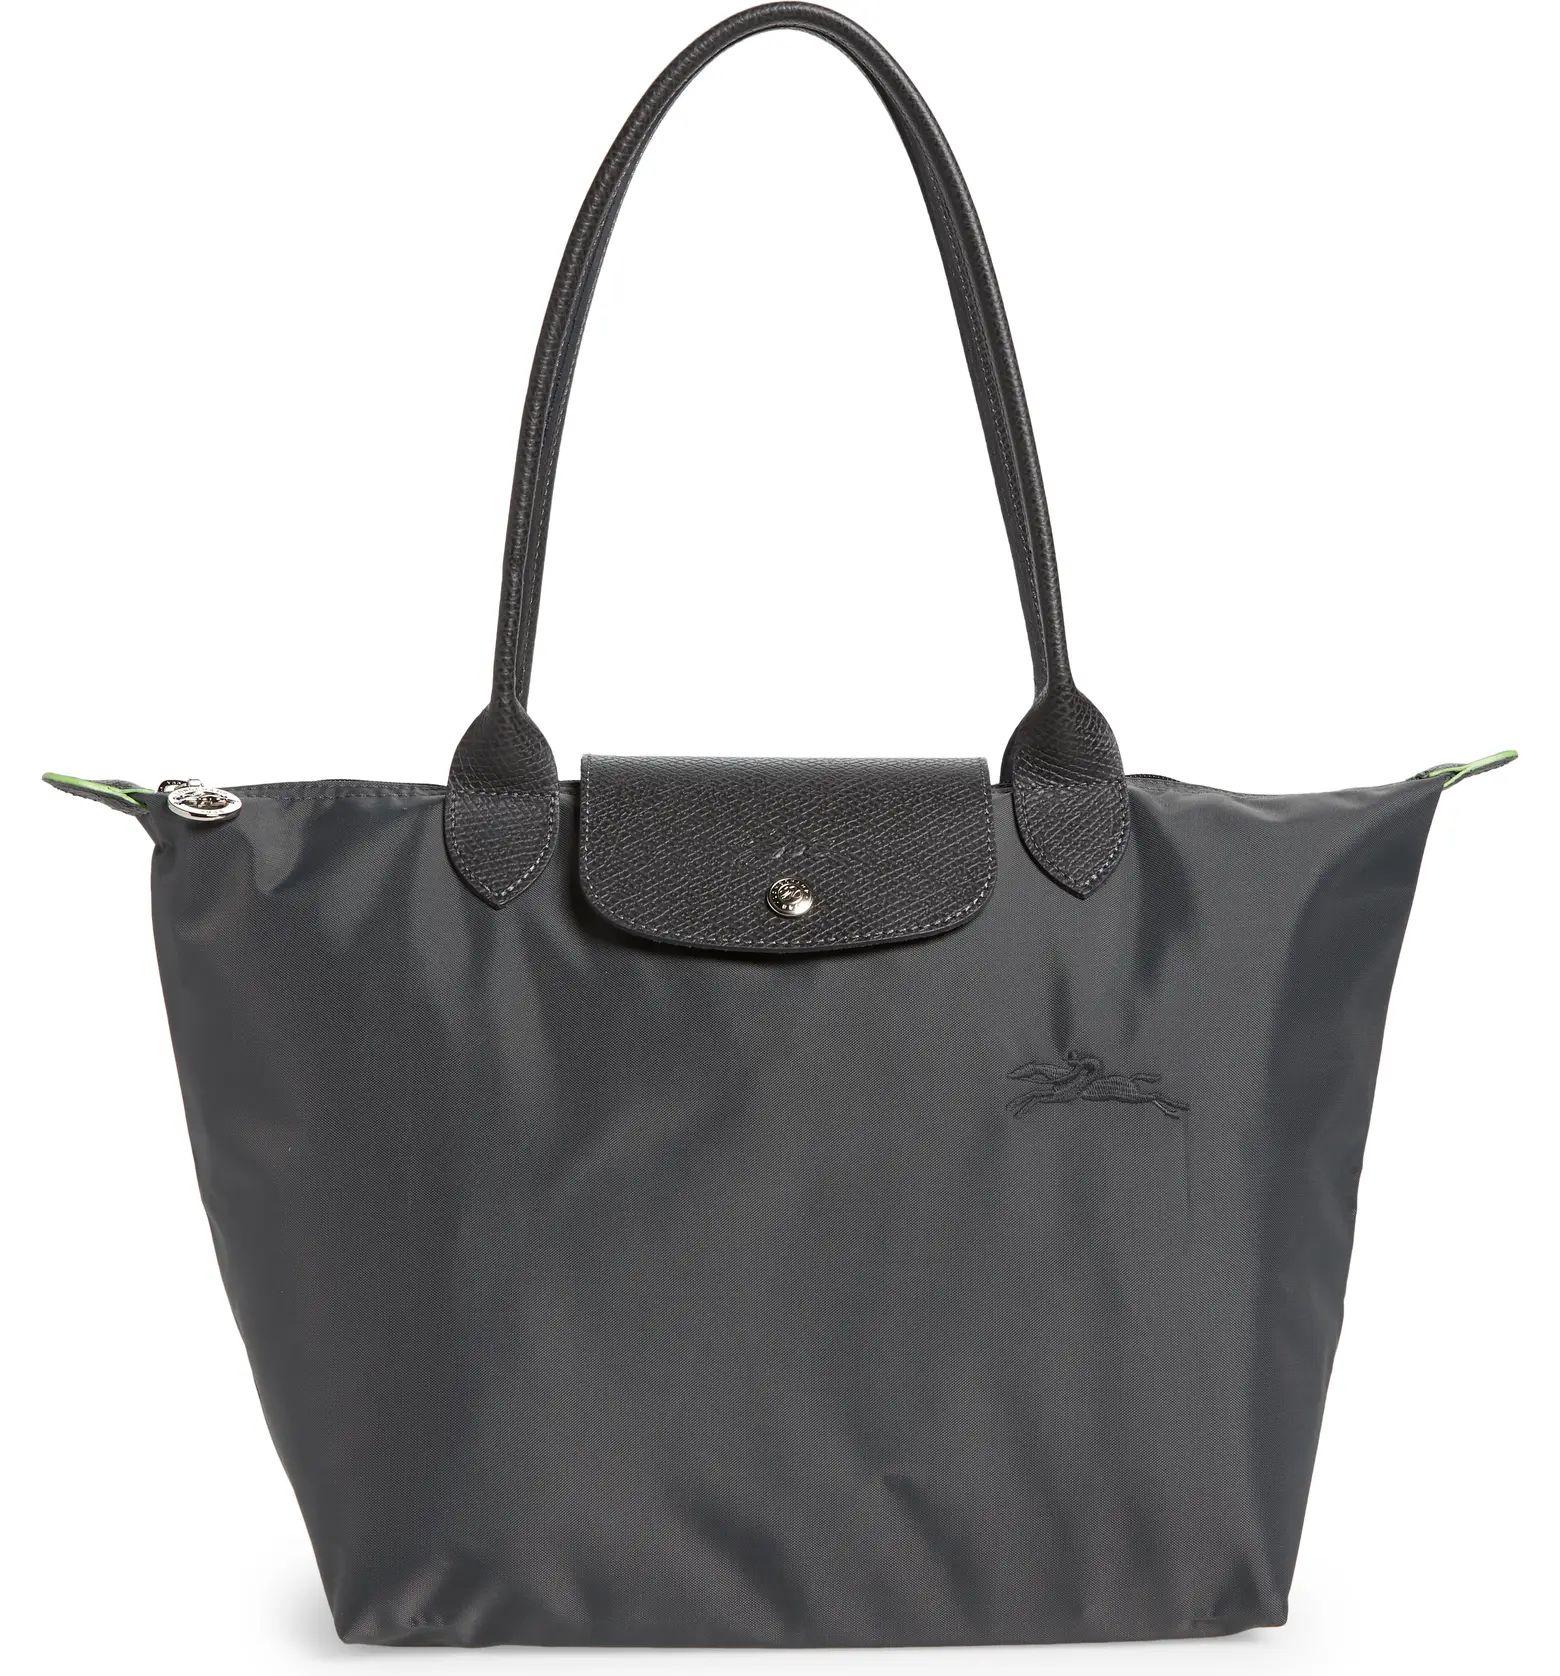 Medium Le Pliage Green Recycled Canvas Shoulder Tote Bag | Nordstrom